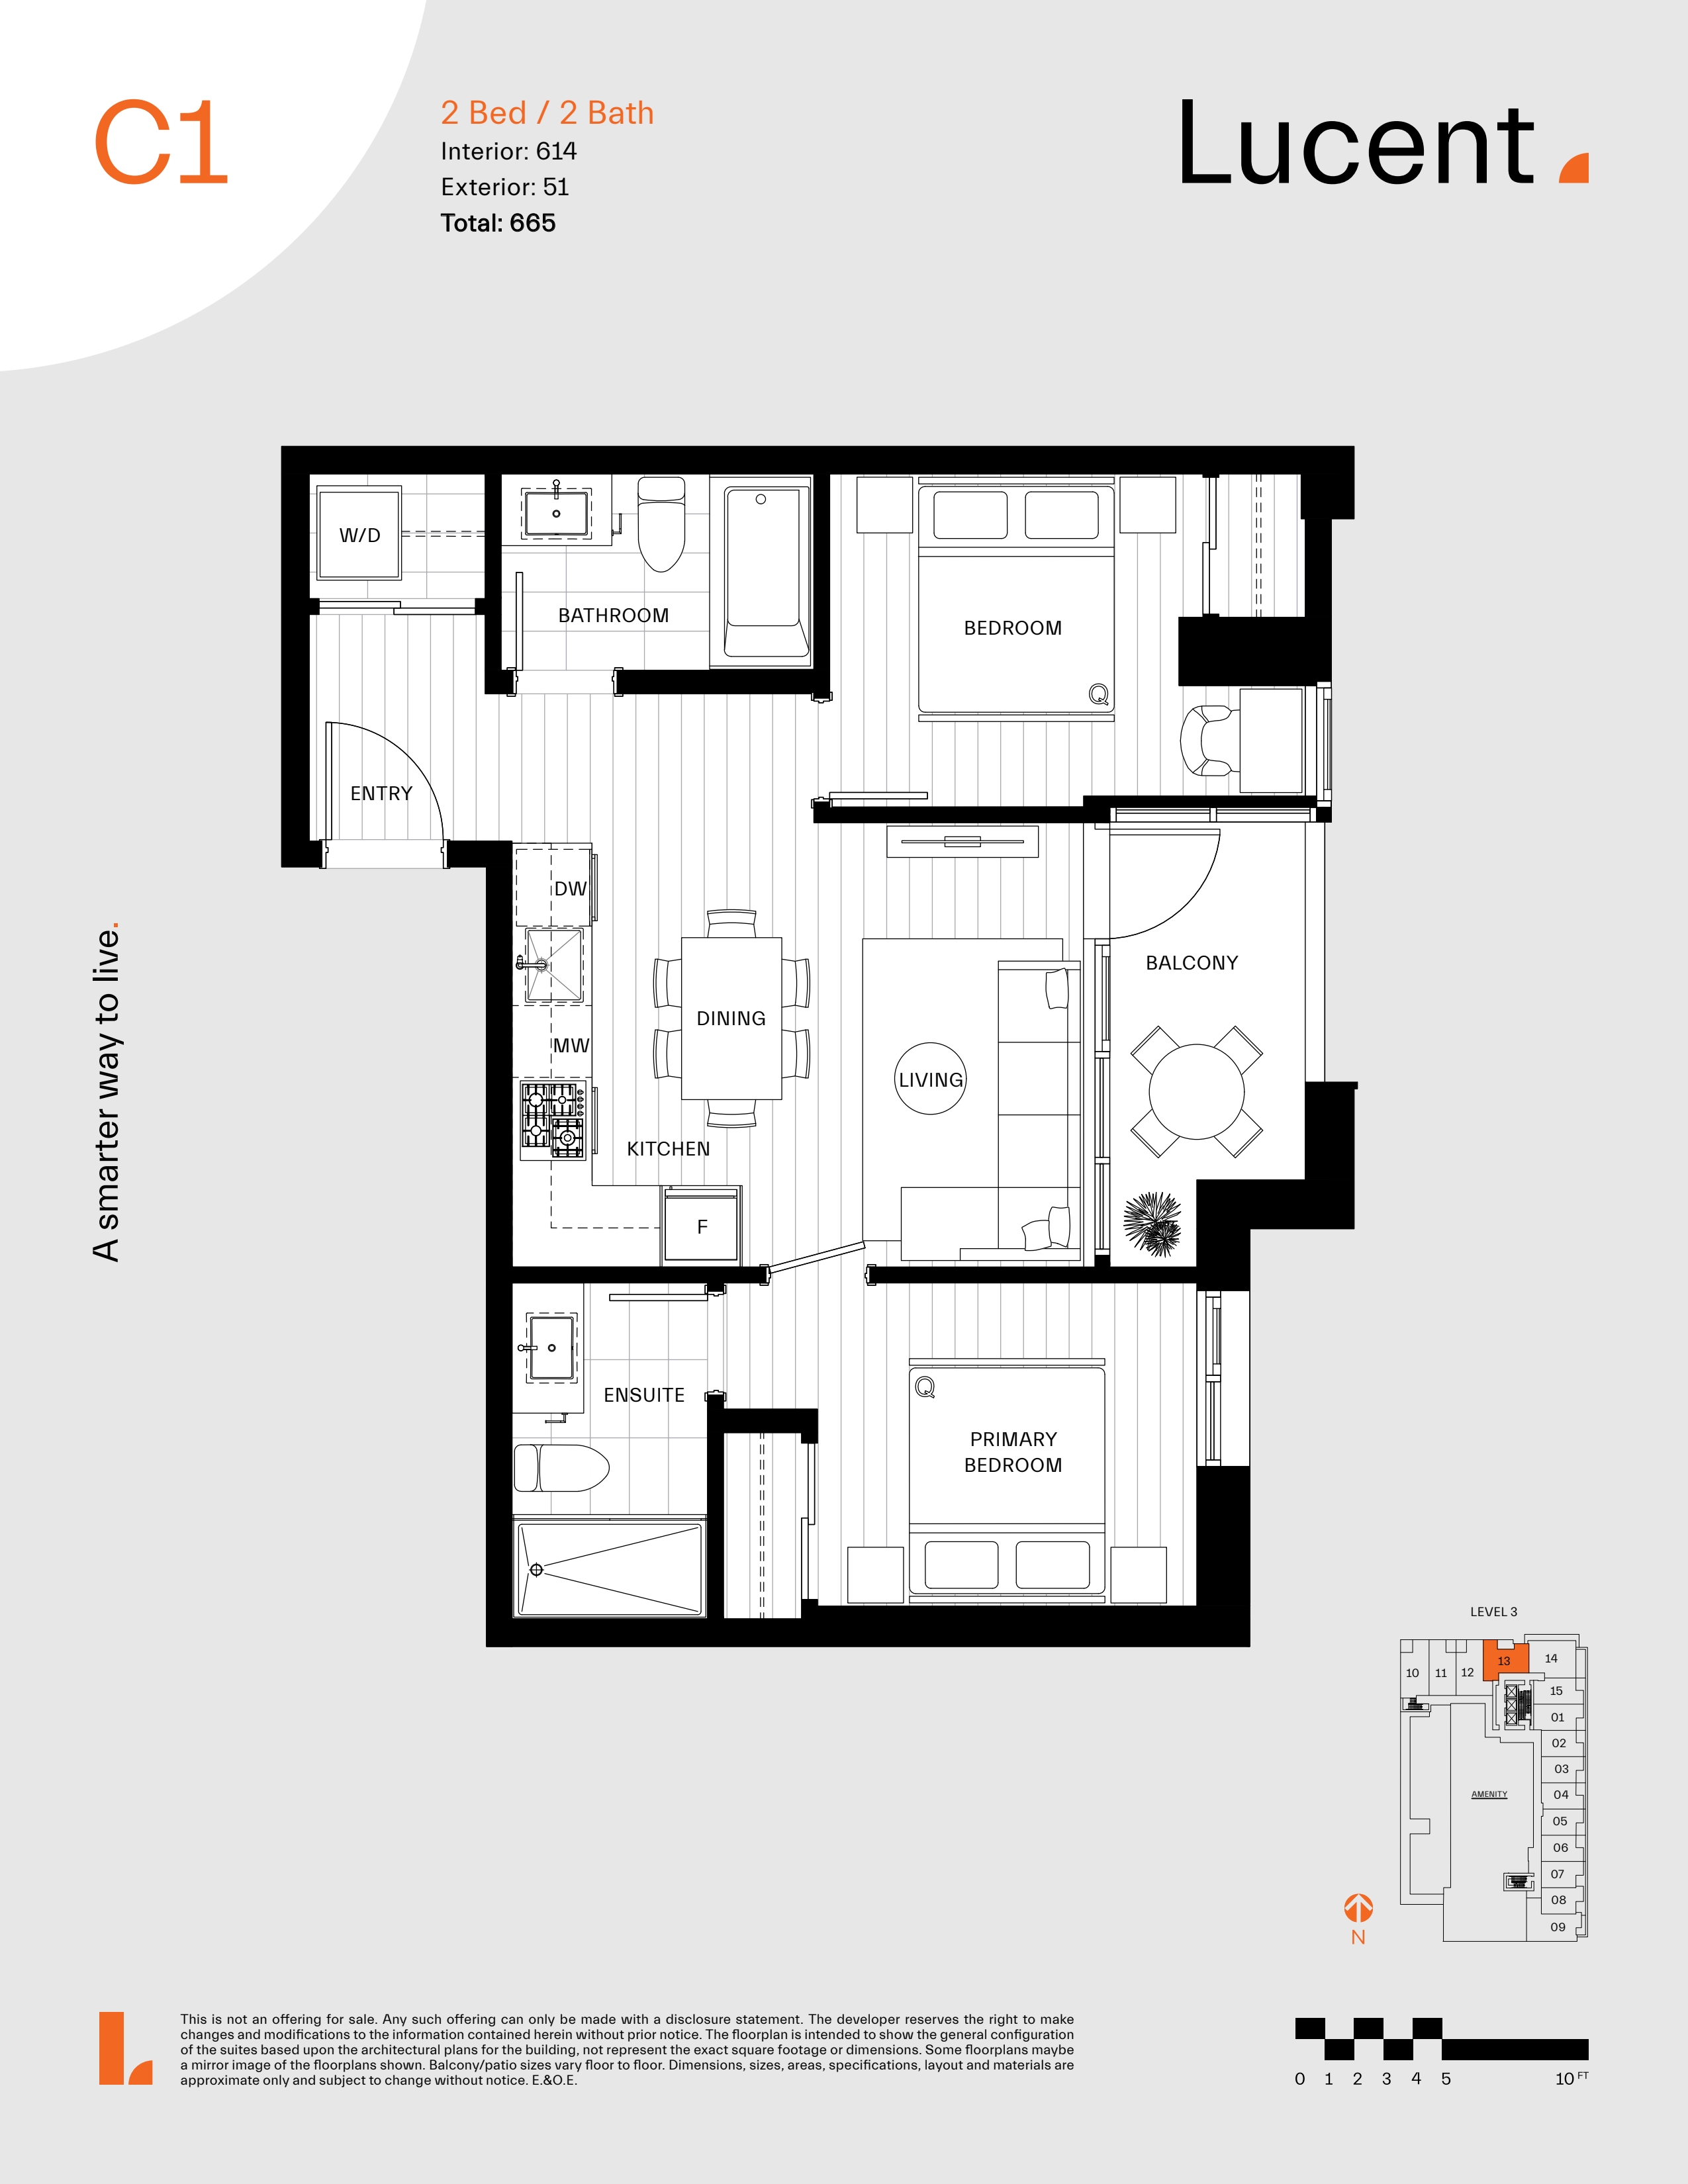 C1 Floor Plan of Lucent Condos with undefined beds